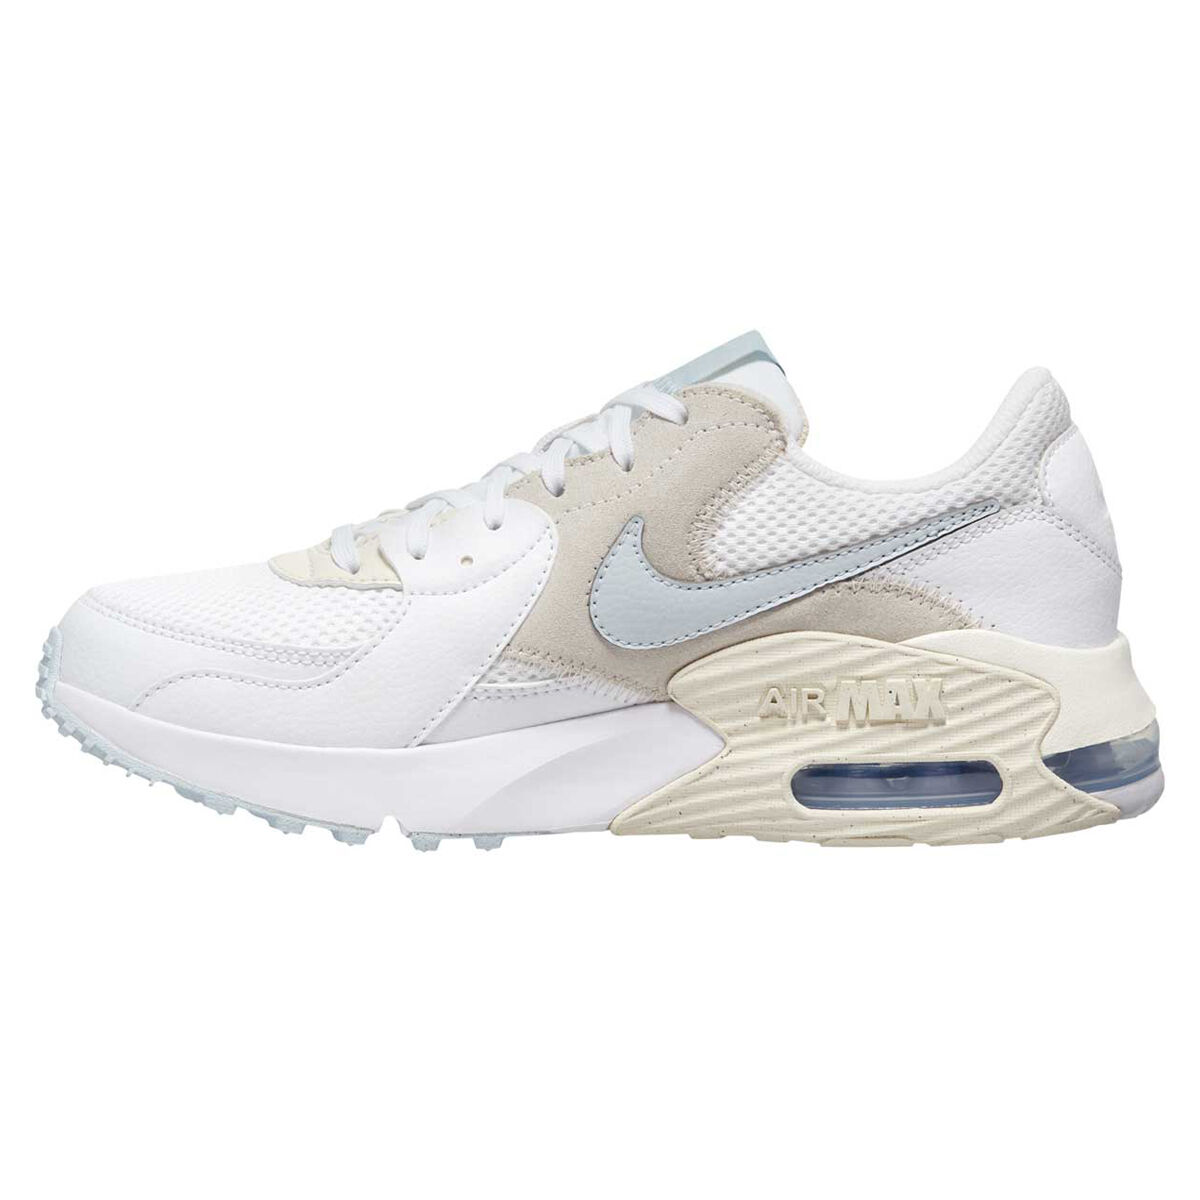 nike air max excee women's stores